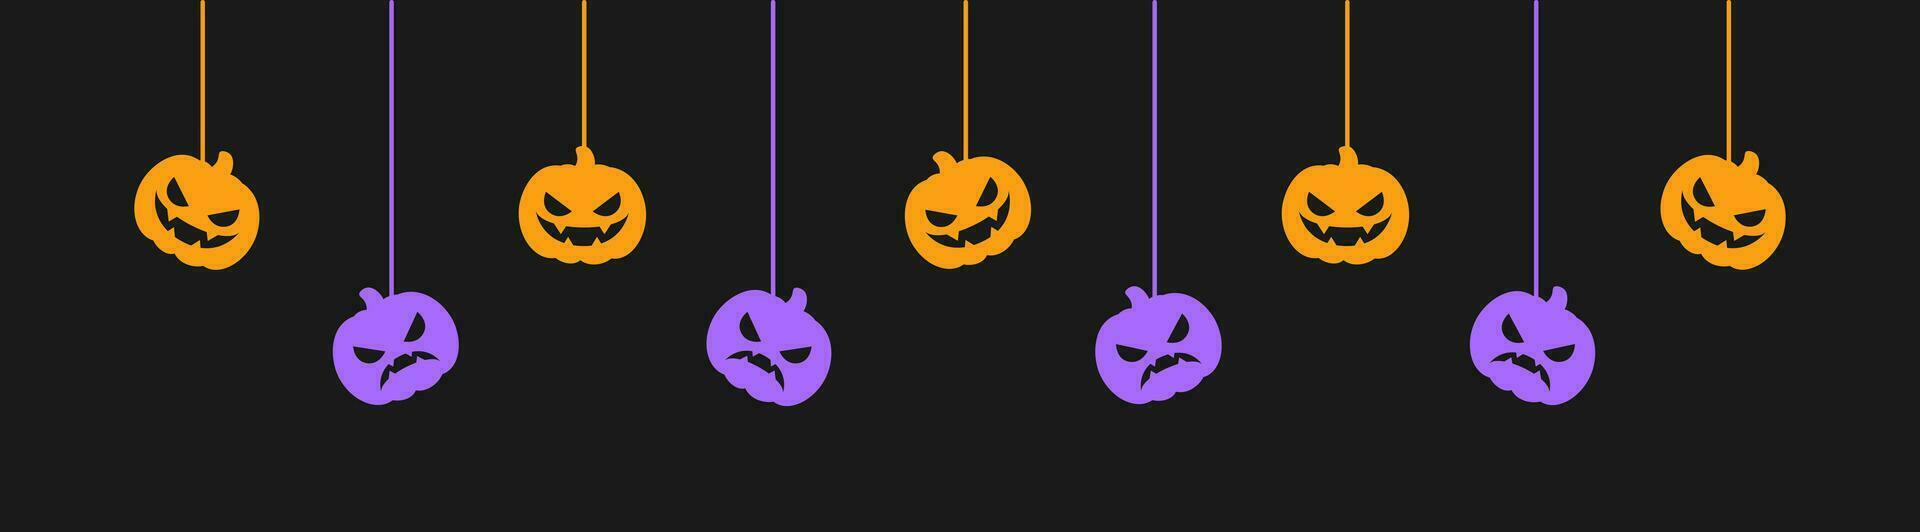 Happy Halloween banner or border with jack o lantern pumpkins silhouette. Hanging Spooky Ornaments Decoration Vector illustration, trick or treat party invitation